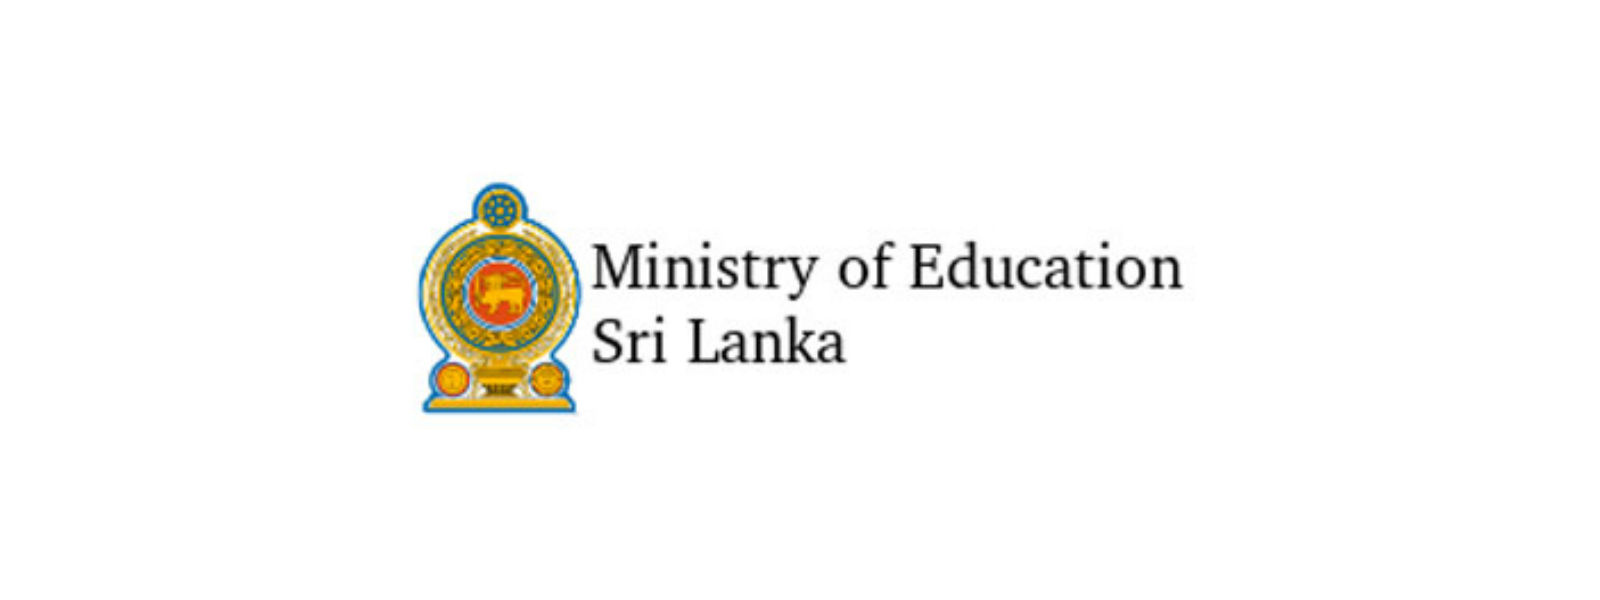 Private schools & Govt approved schools to be regulated under Education Ministry